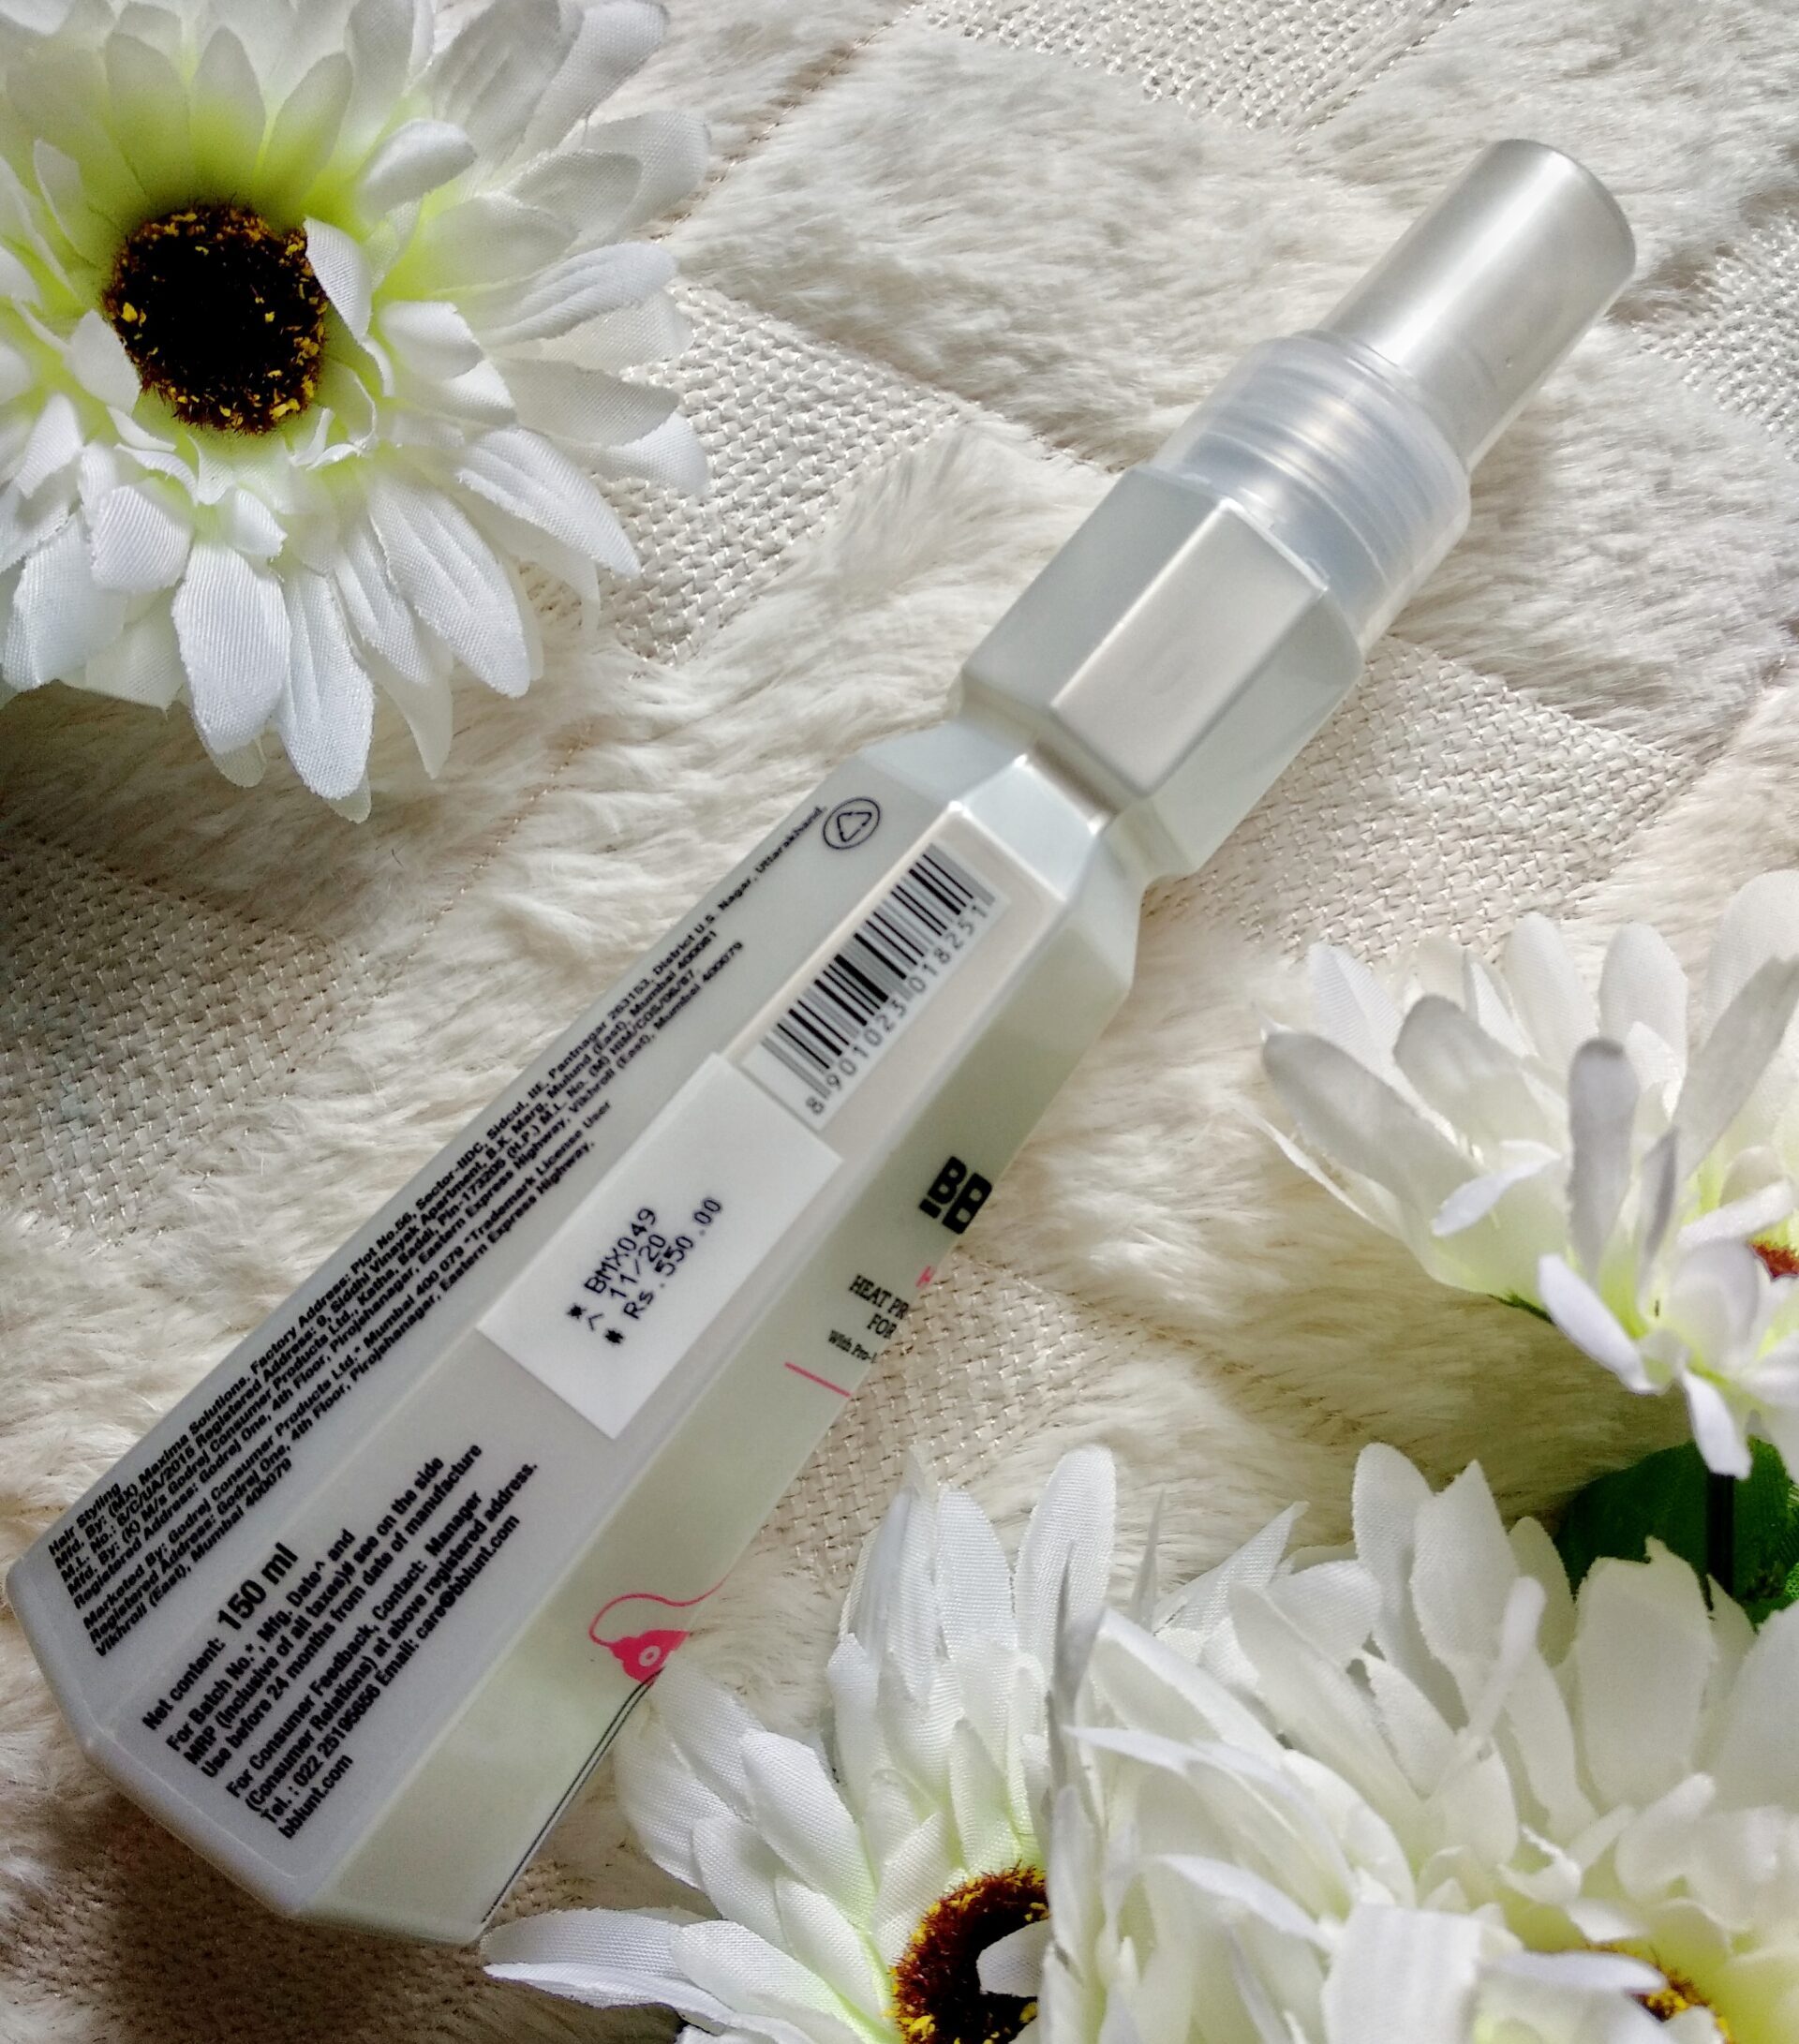 bblunt hair protection mist review